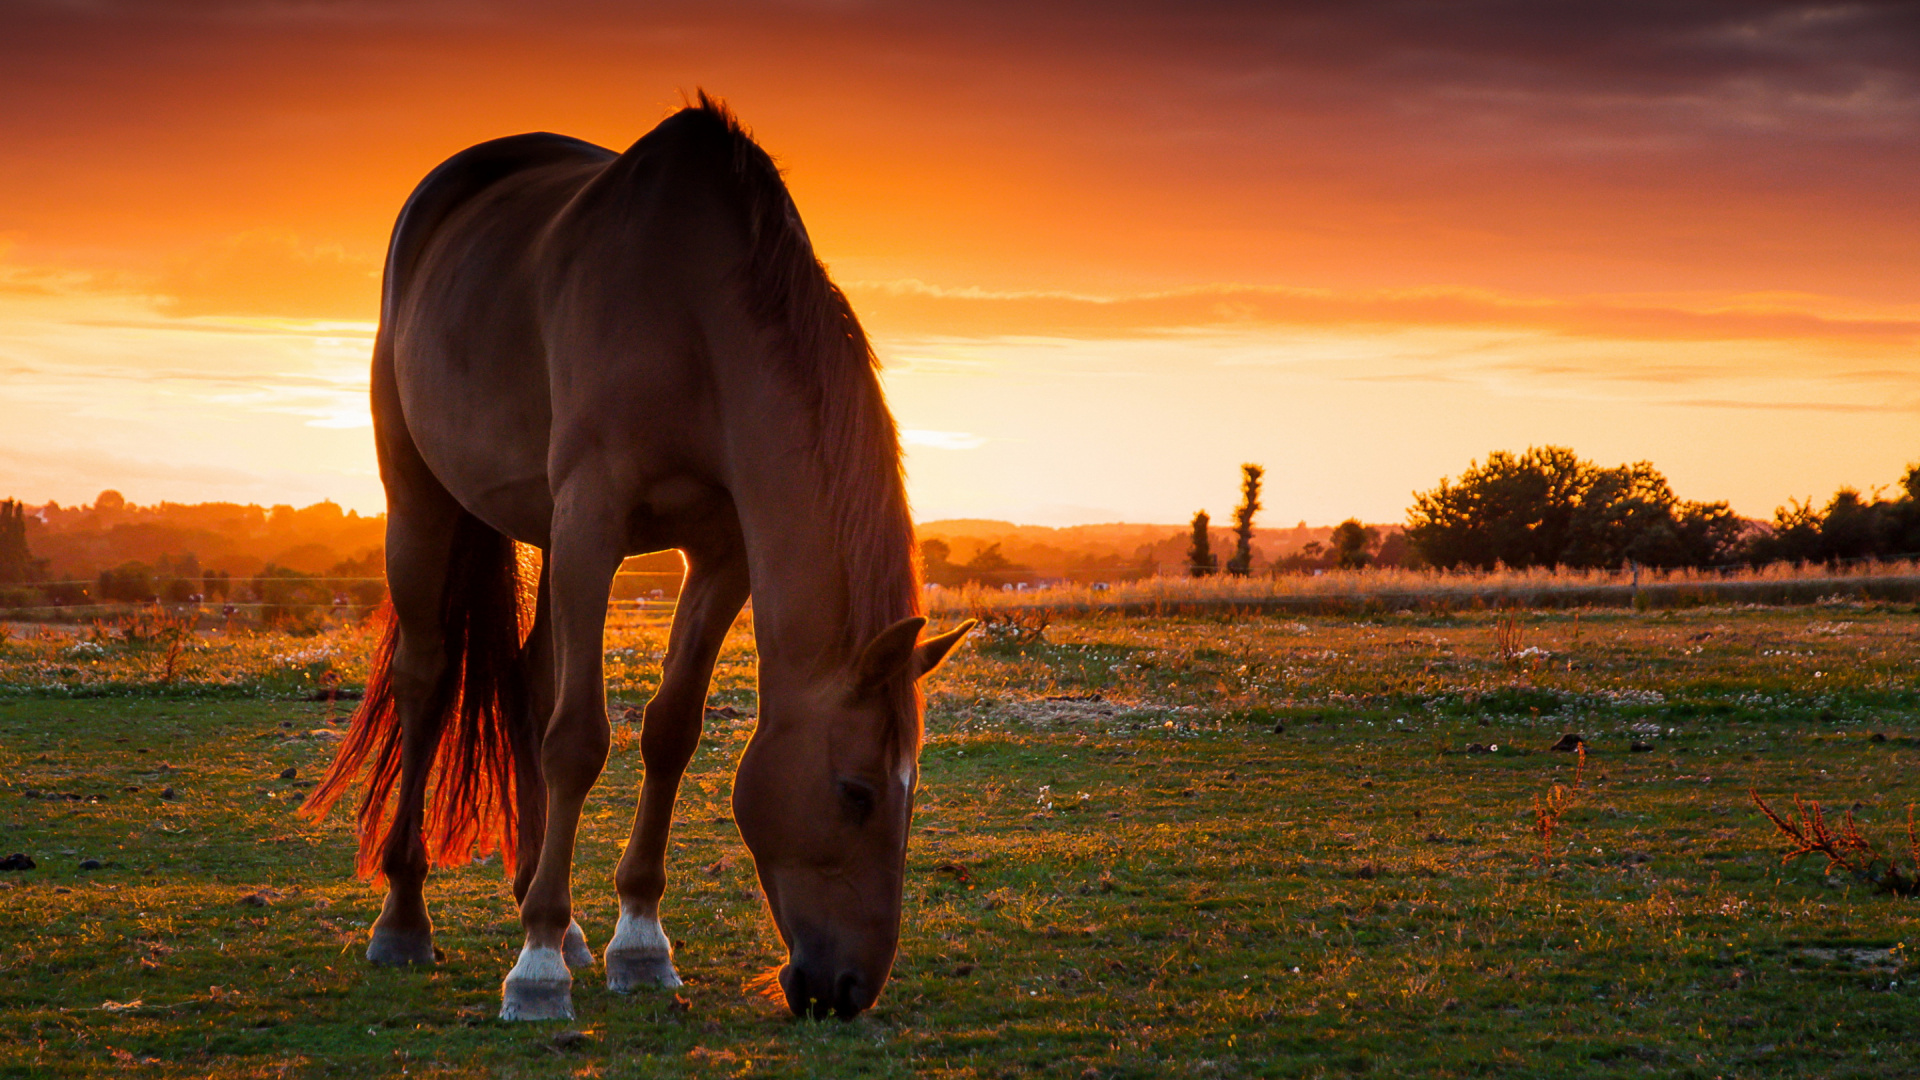 Brown Horse on Green Grass Field During Sunset. Wallpaper in 1920x1080 Resolution